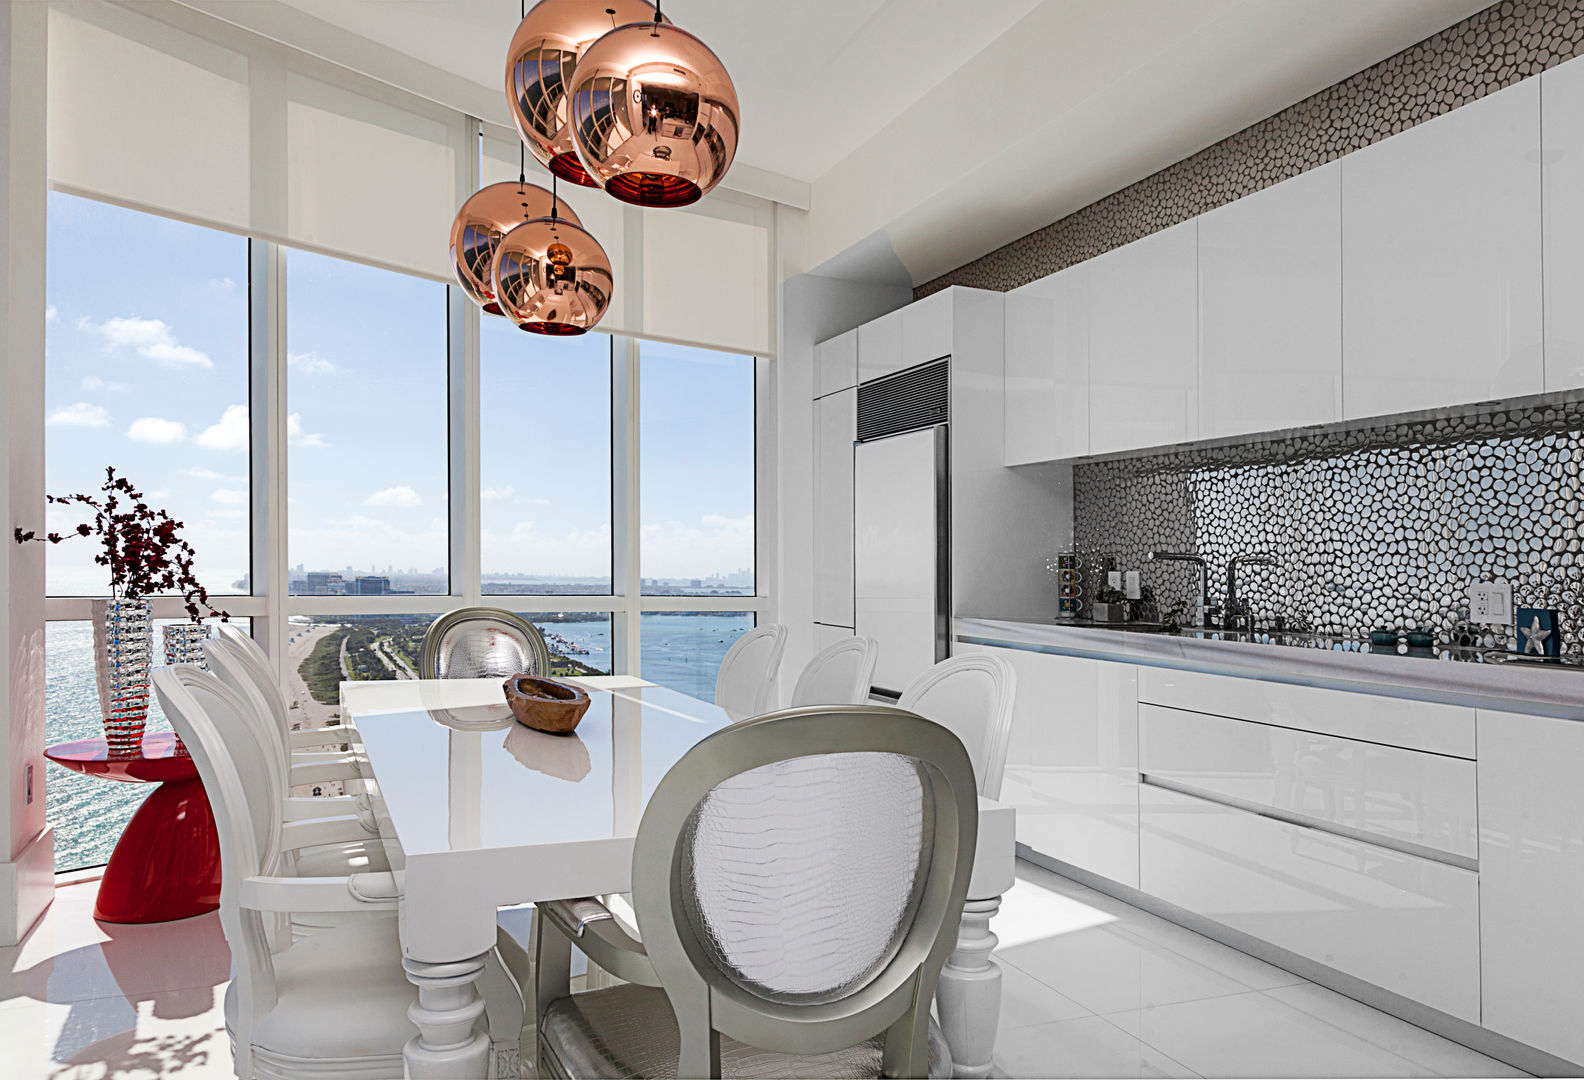 Sunny Isles - Florida - US, Infinity Spaces Infinity Spaces Modern style kitchen